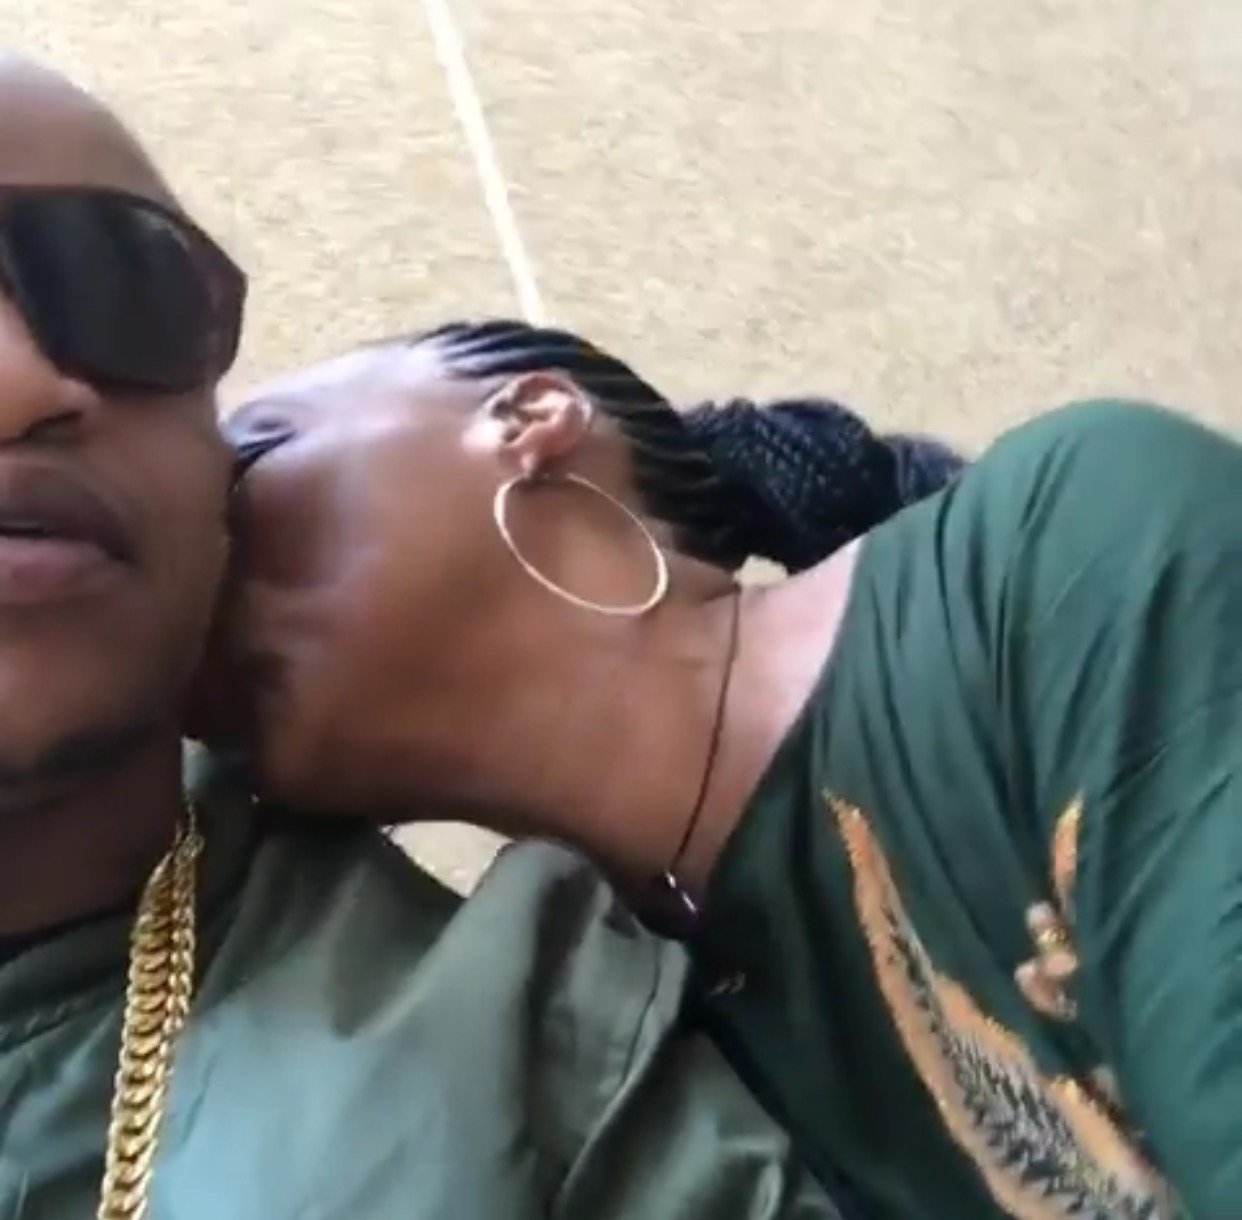 Prezzo's mum shows off her rapping skills before planting a kiss on her son (Video)